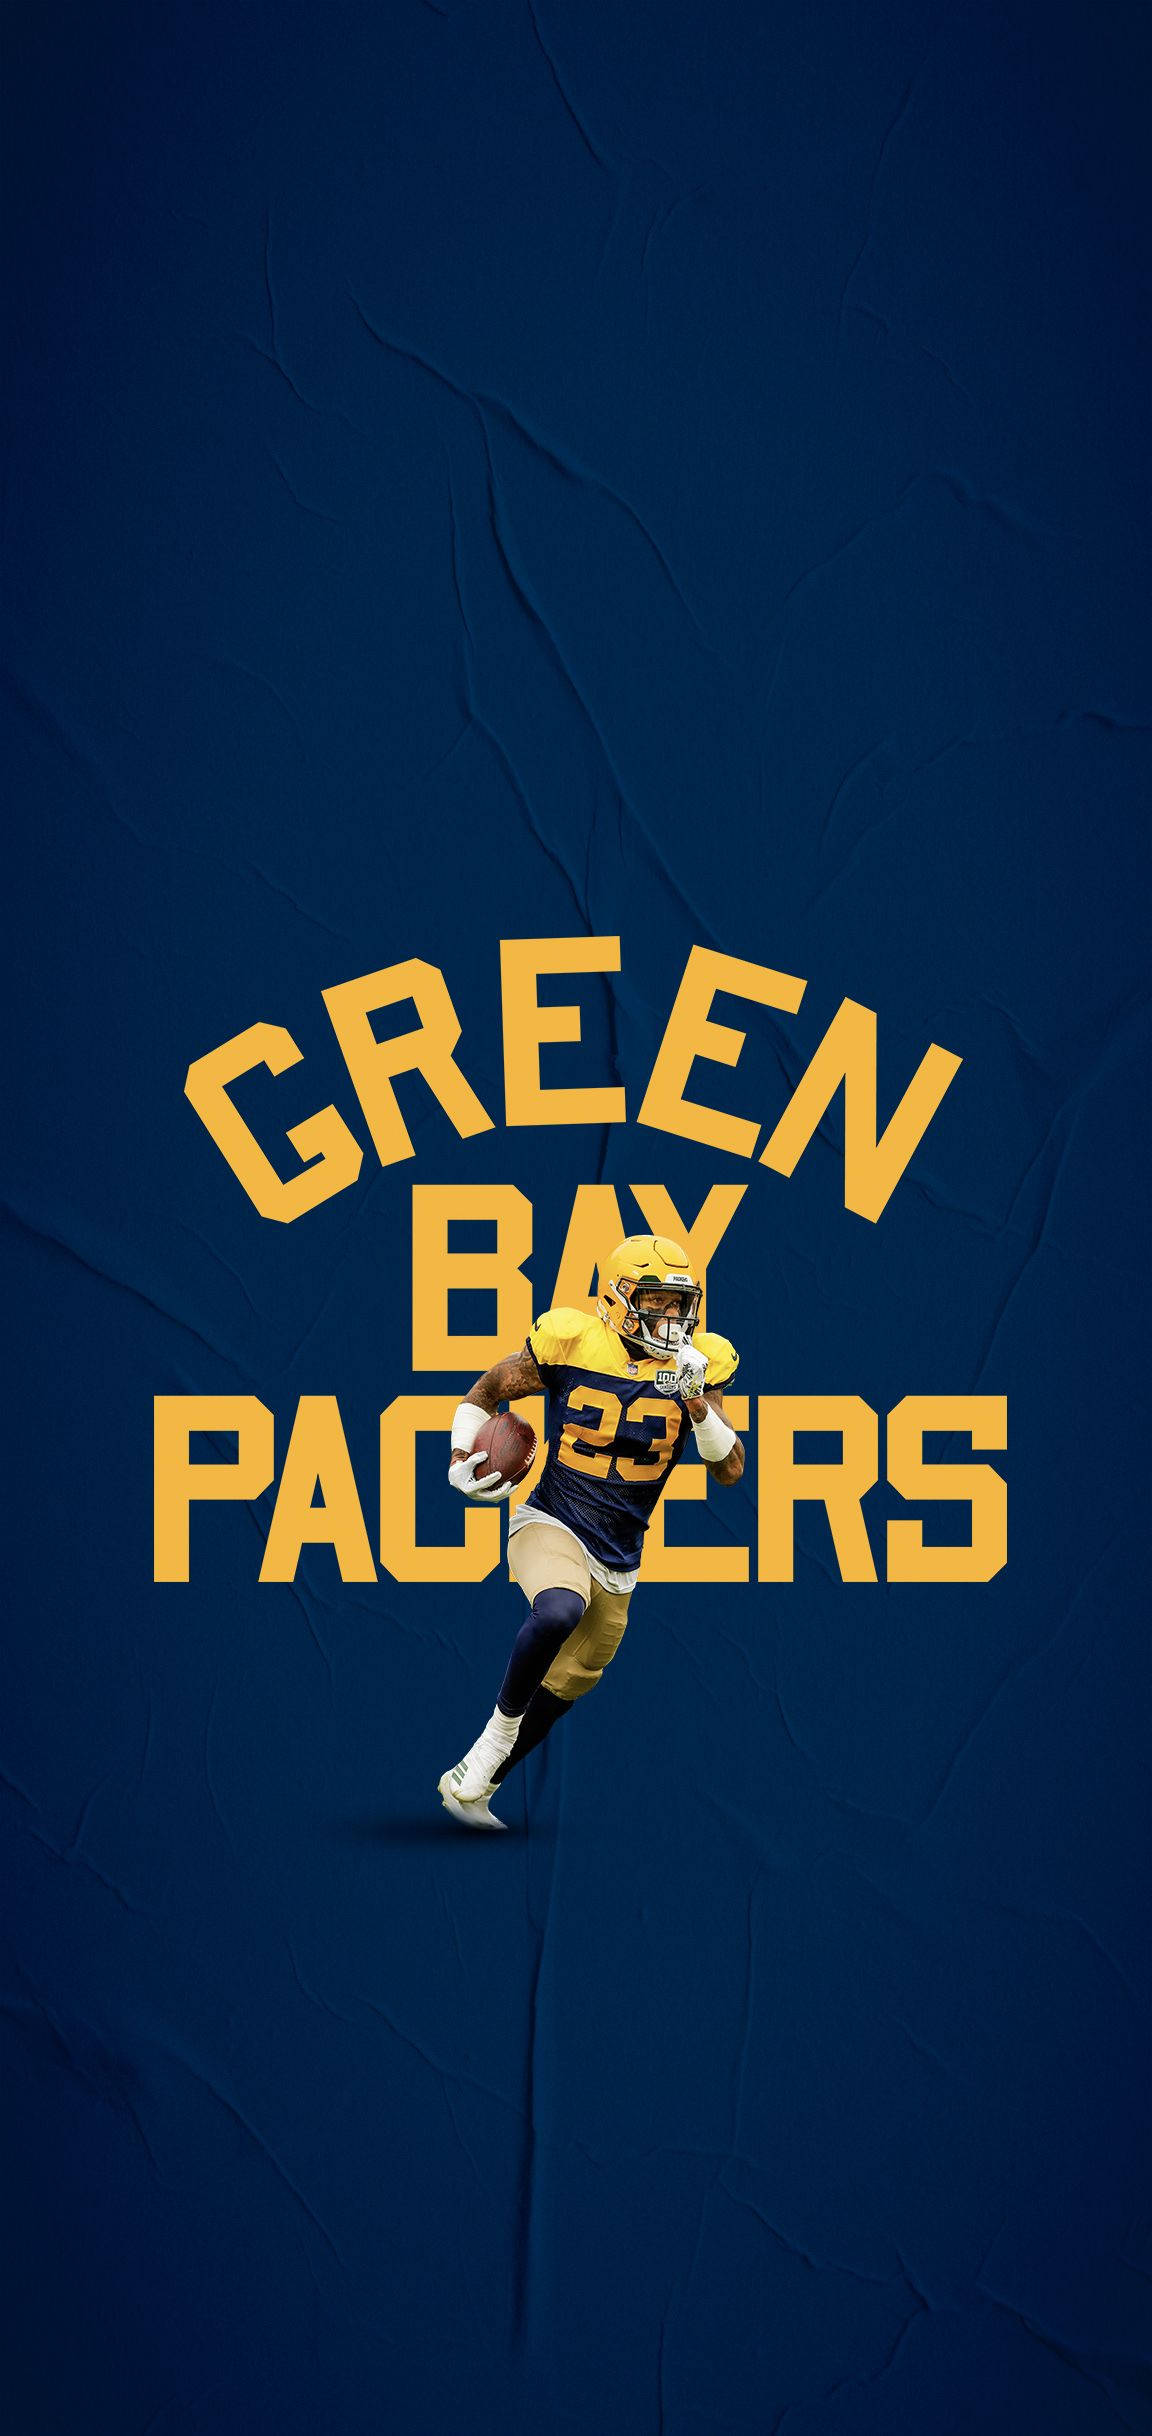 Green Bay Packers Player 23 Jaire Alexander Background